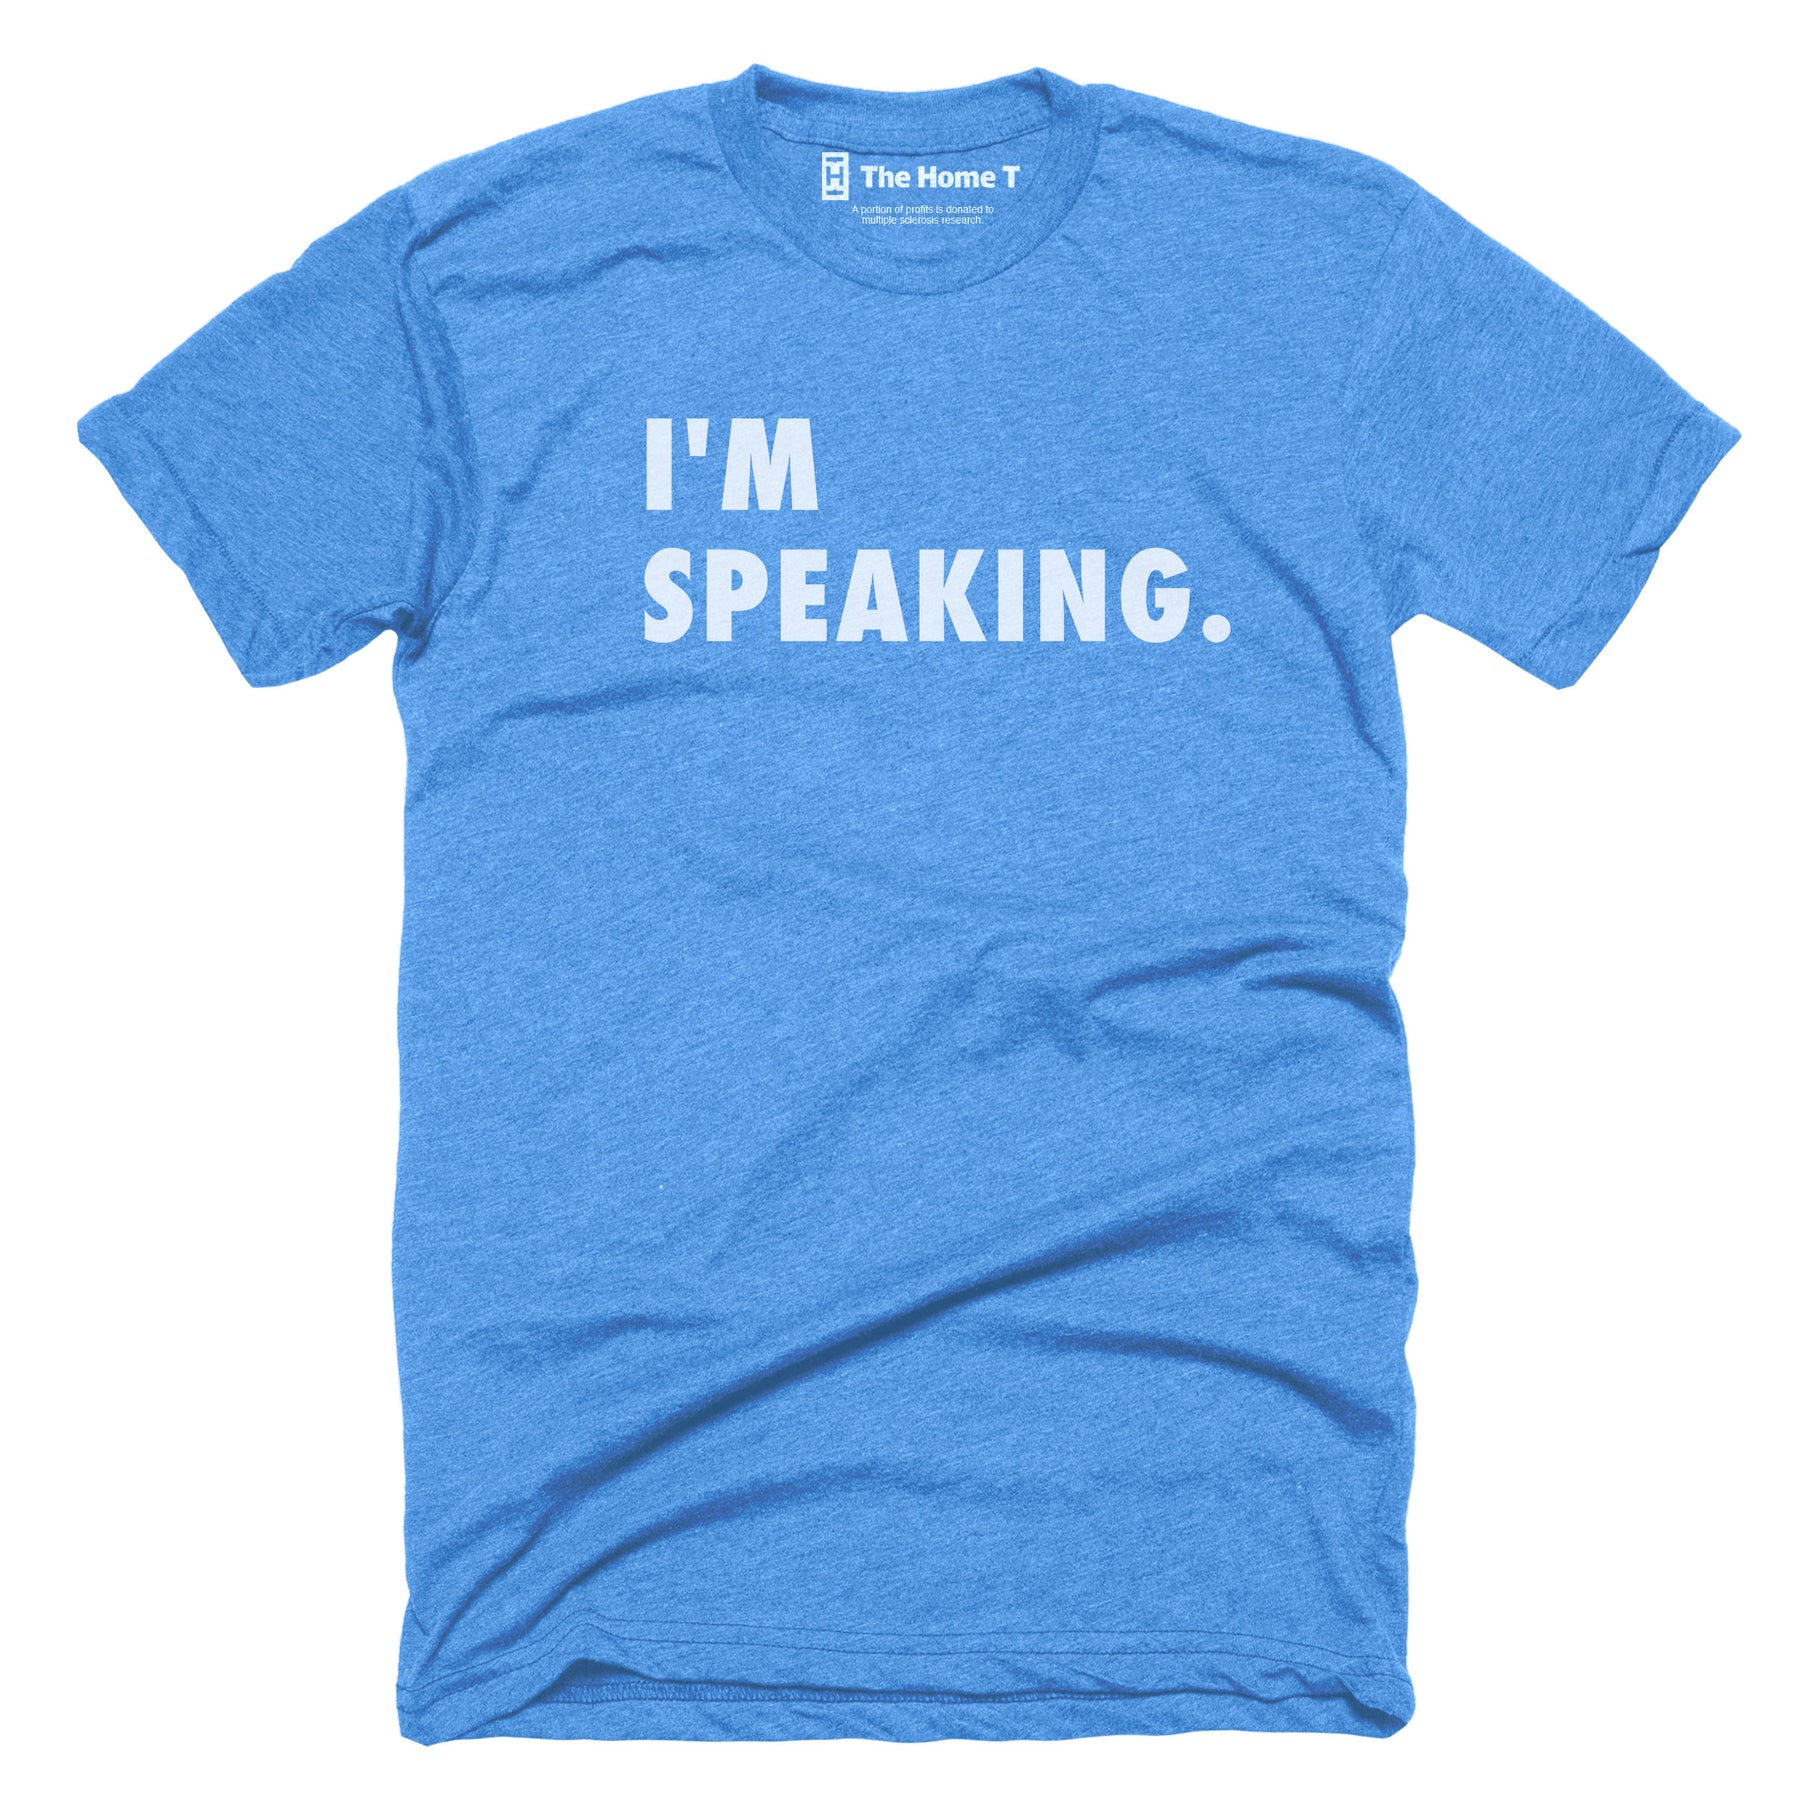 I'm Speaking The Home T XS Blue